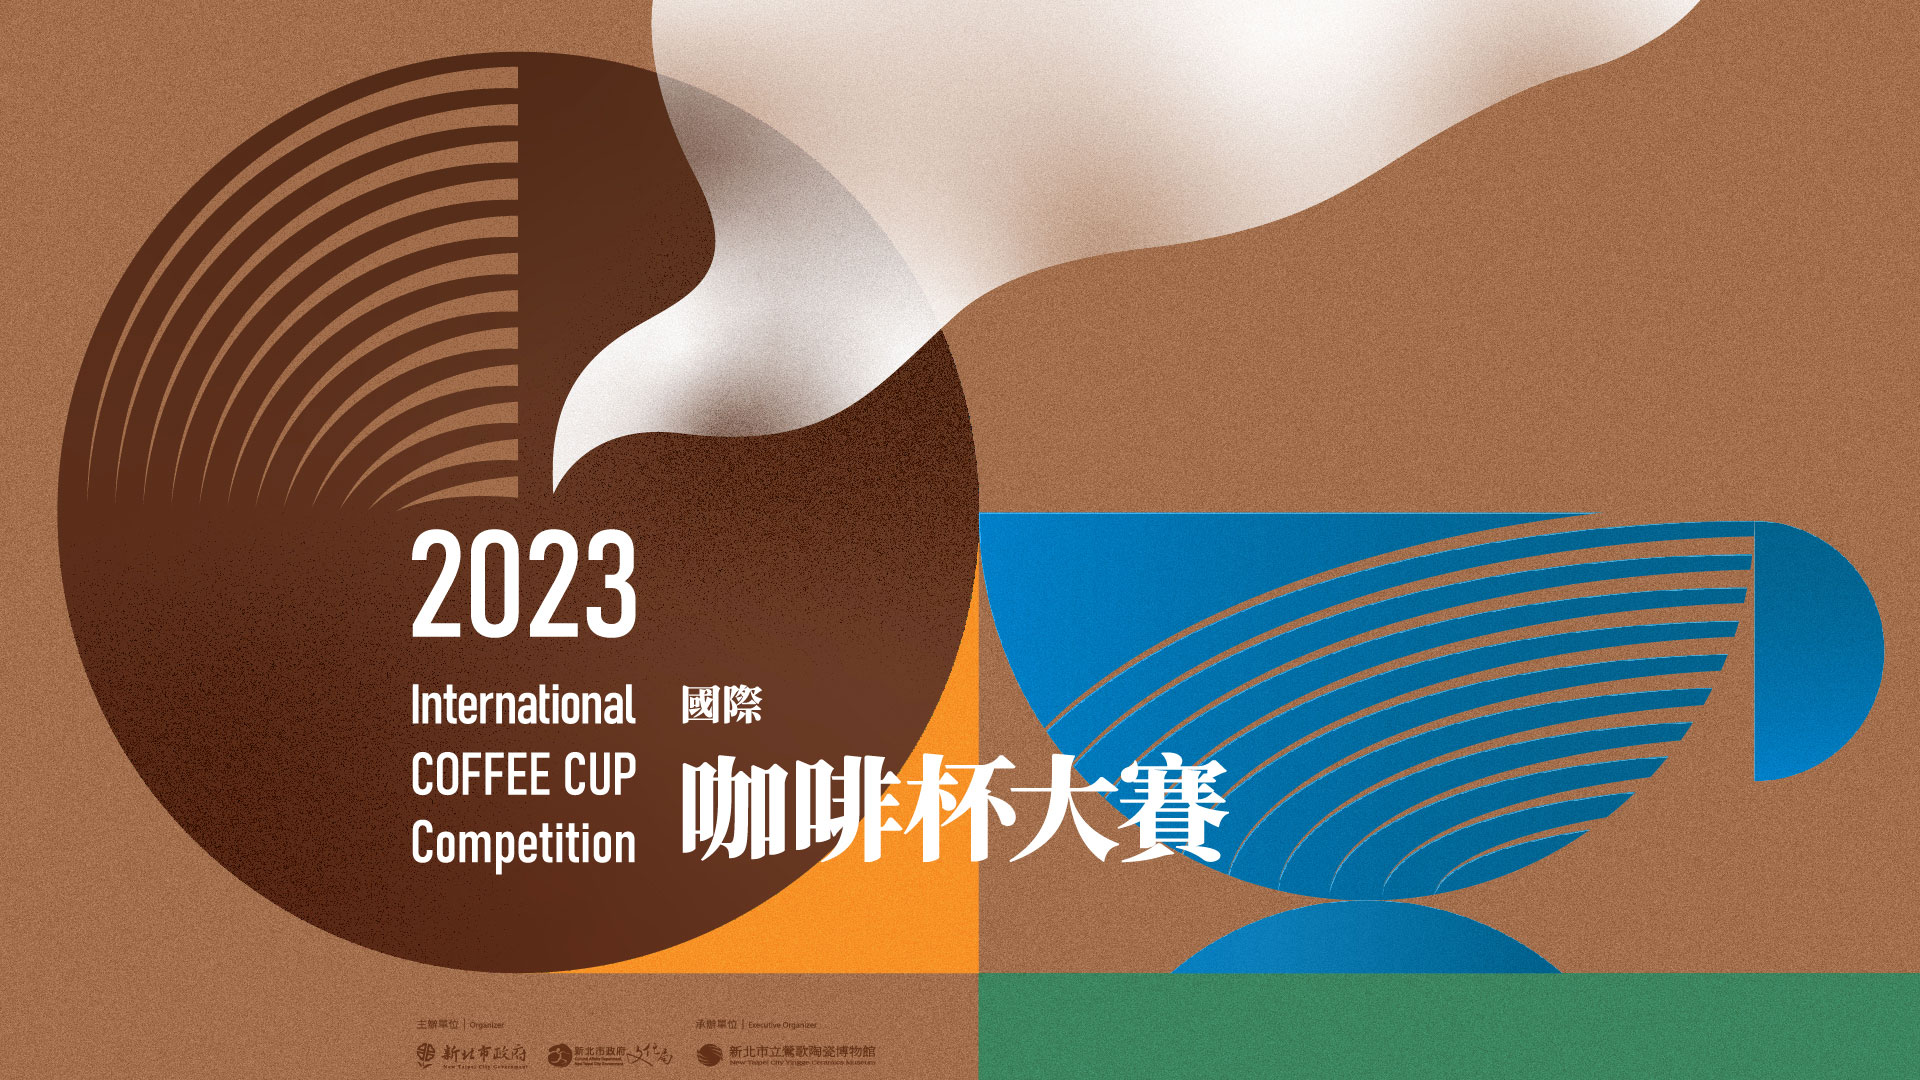 2023 International Coffee Cup Competition